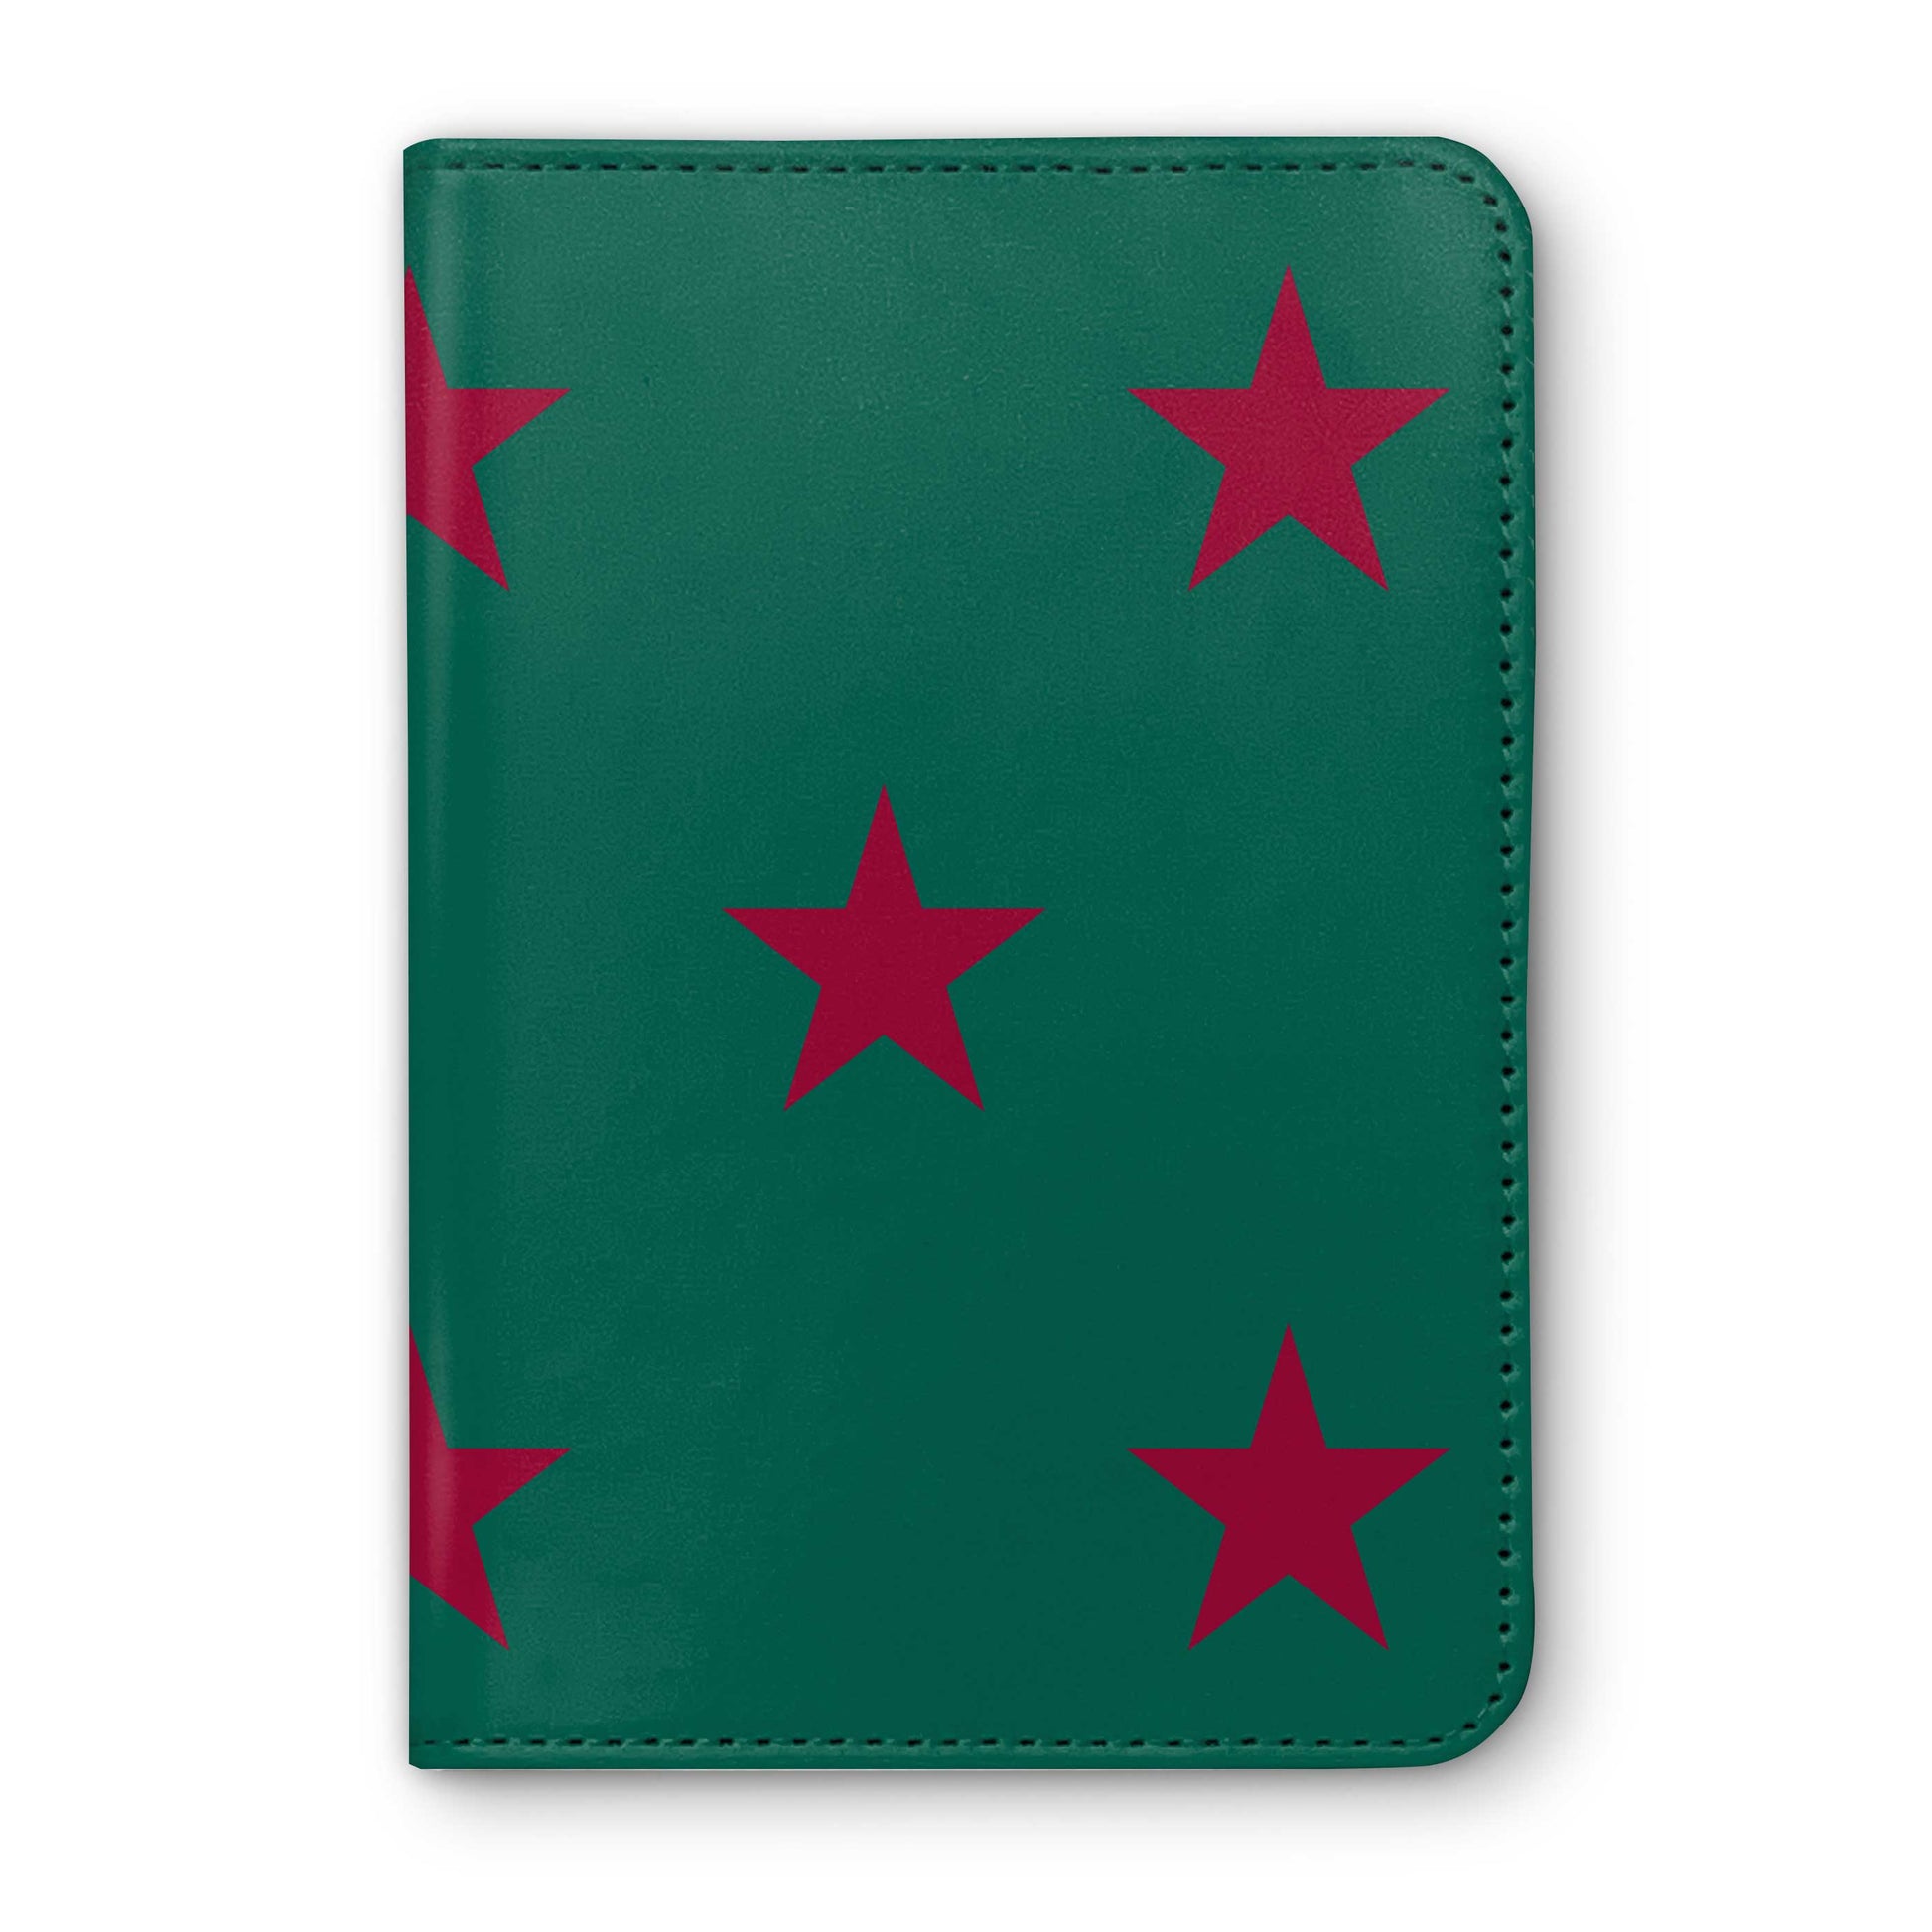 T P Radford Horse Racing Passport Holder - Hacked Up Horse Racing Gifts